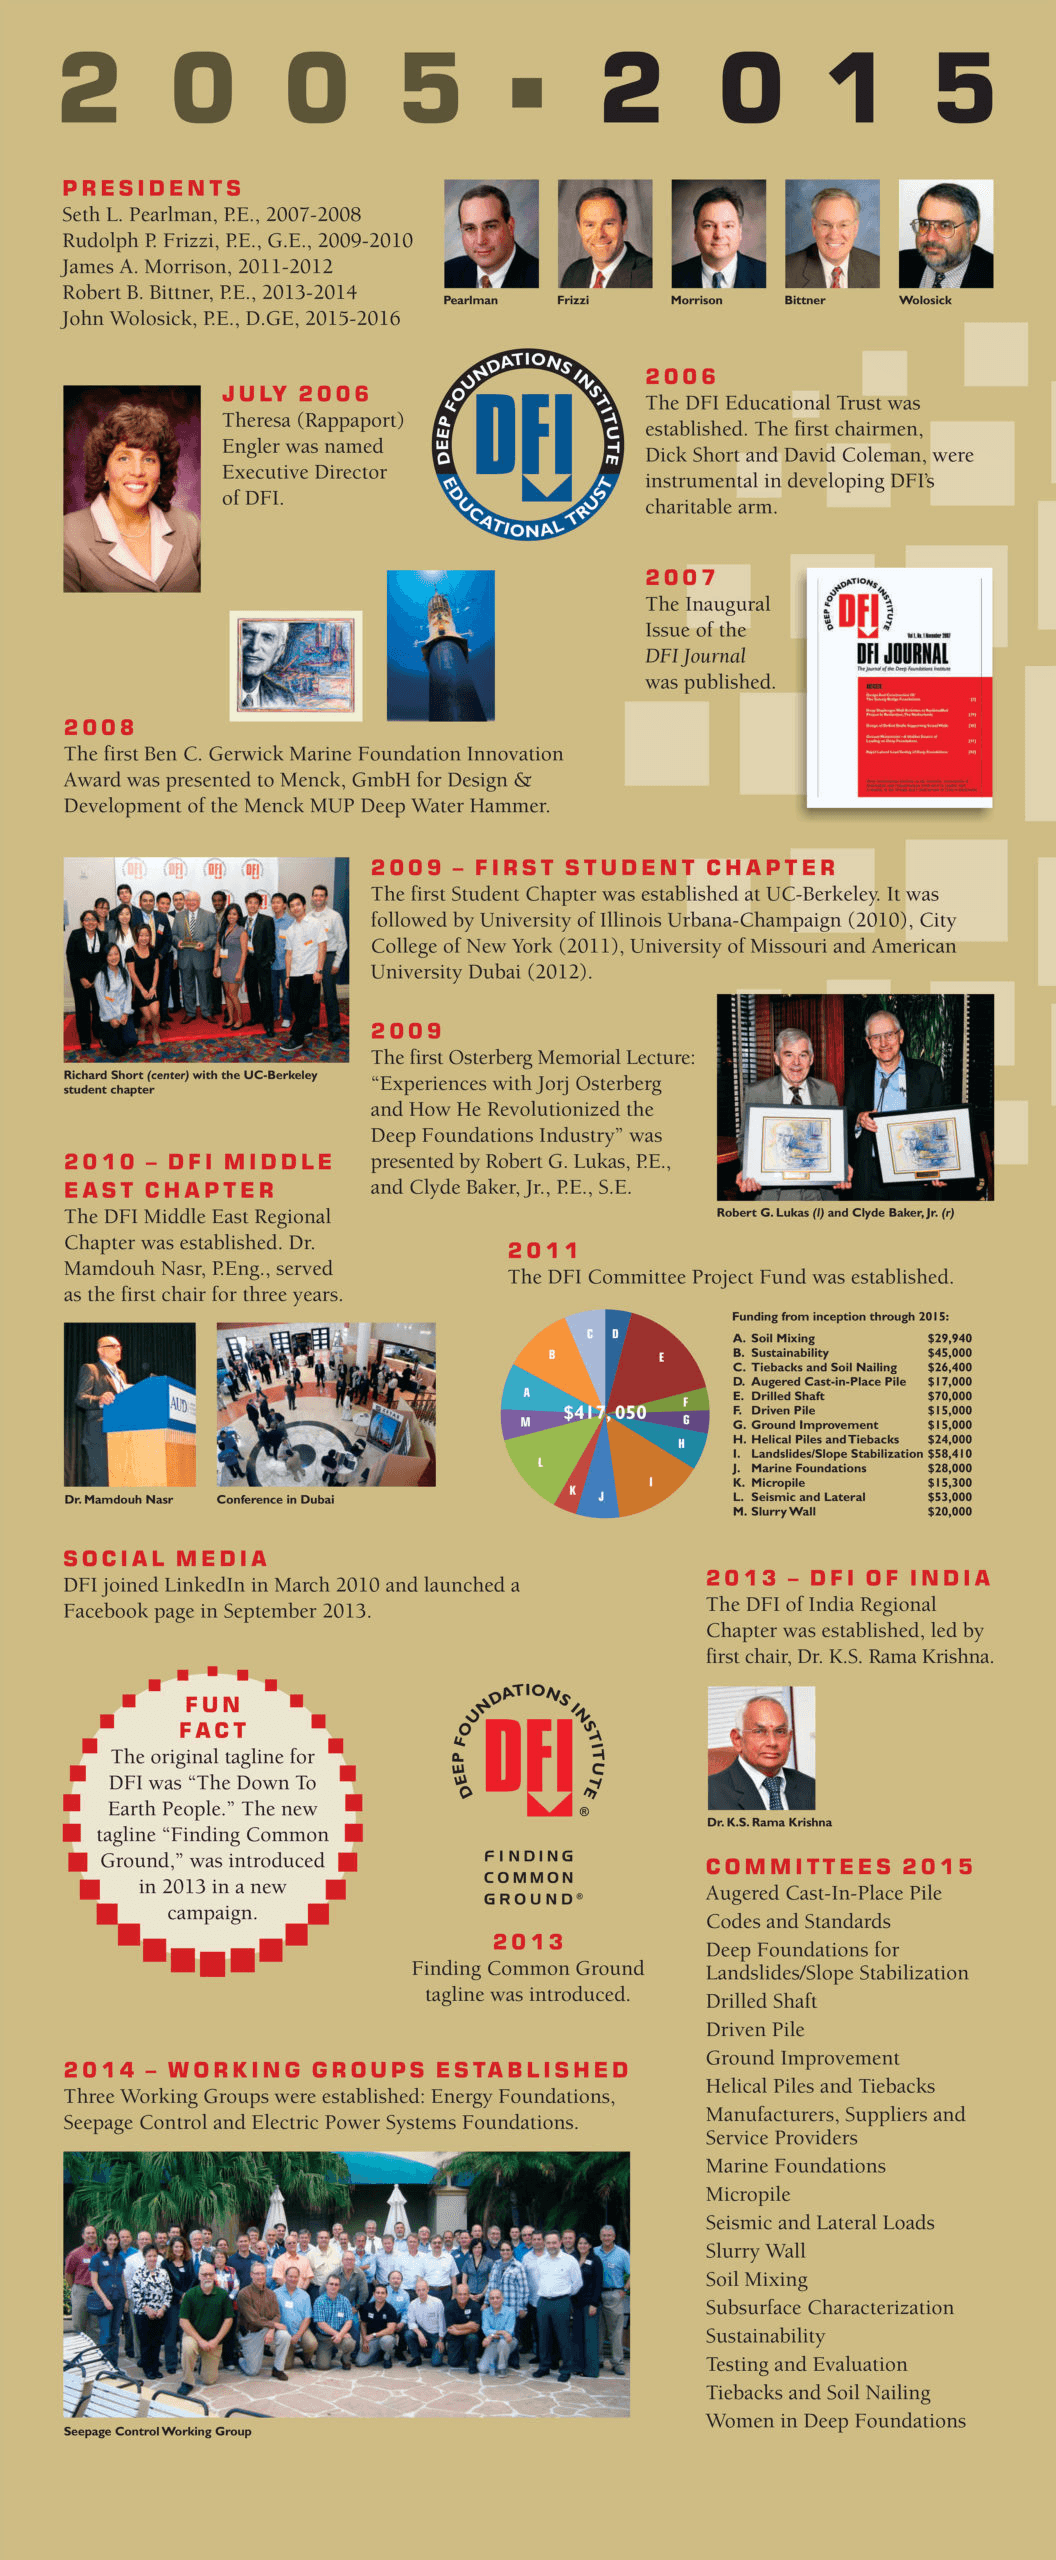 timeline collage of DFI from 2005 - 2015